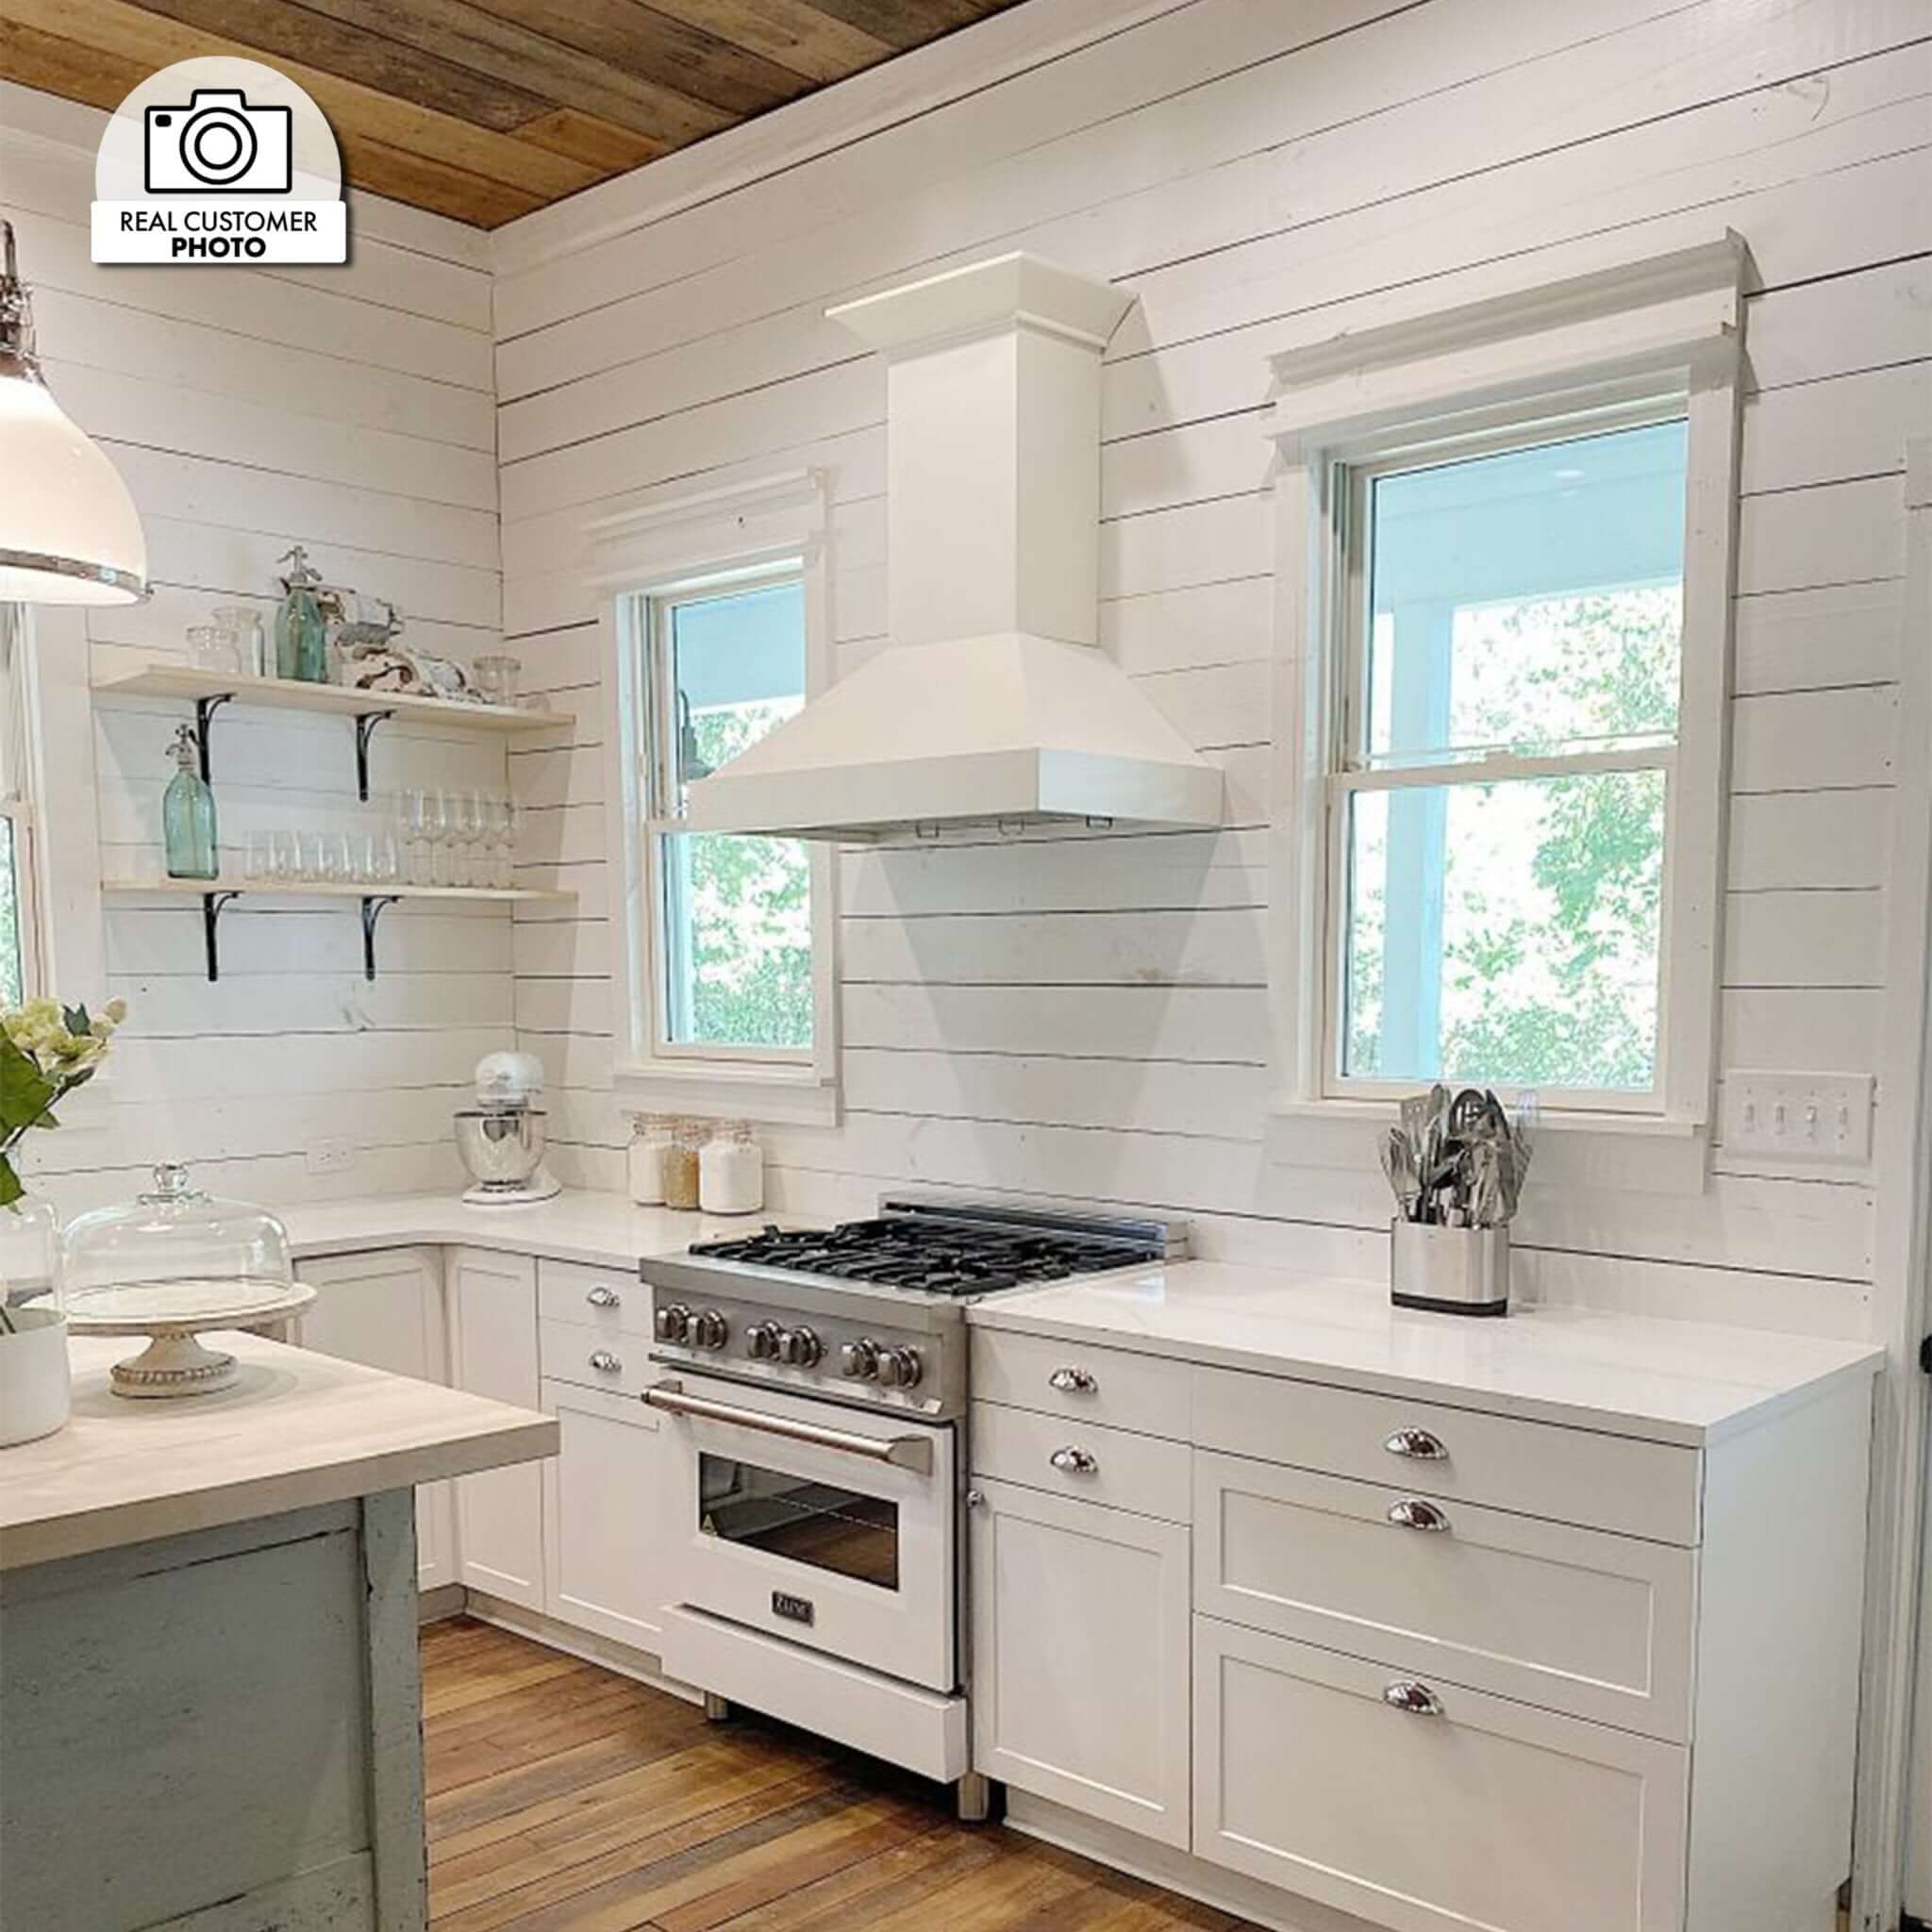 ZLINE Ducted Wooden Wall Mount Range Hood in Cottage White (KBTT) in a compact cottage-style kitchen